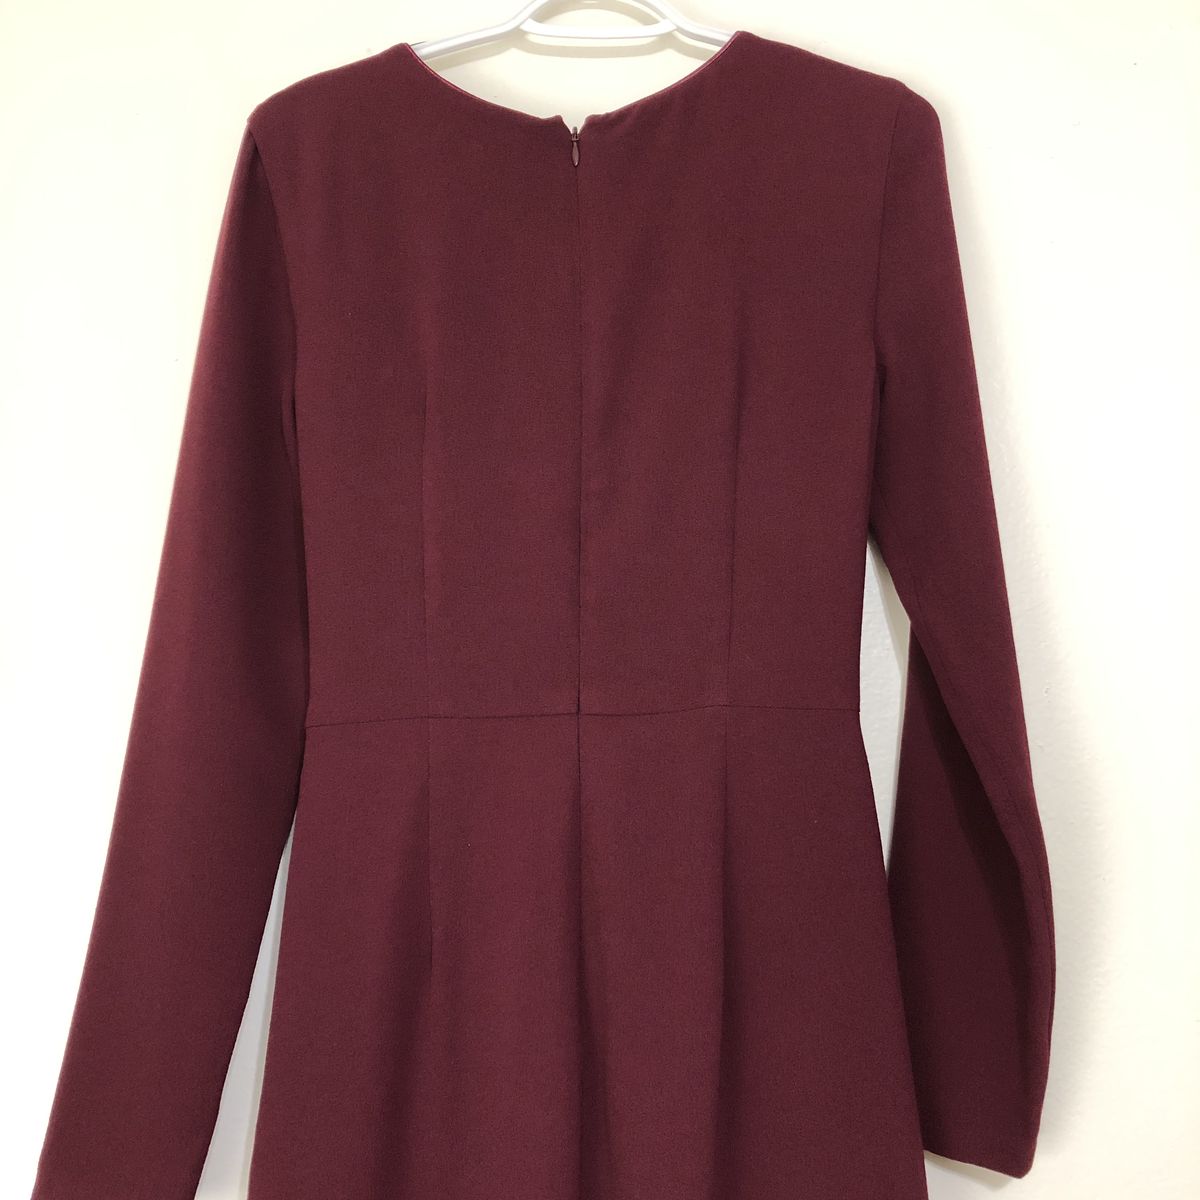 Style Naomi Dress the Population Size 4 Long Sleeve Sequined Burgundy Red Side Slit Dress on Queenly